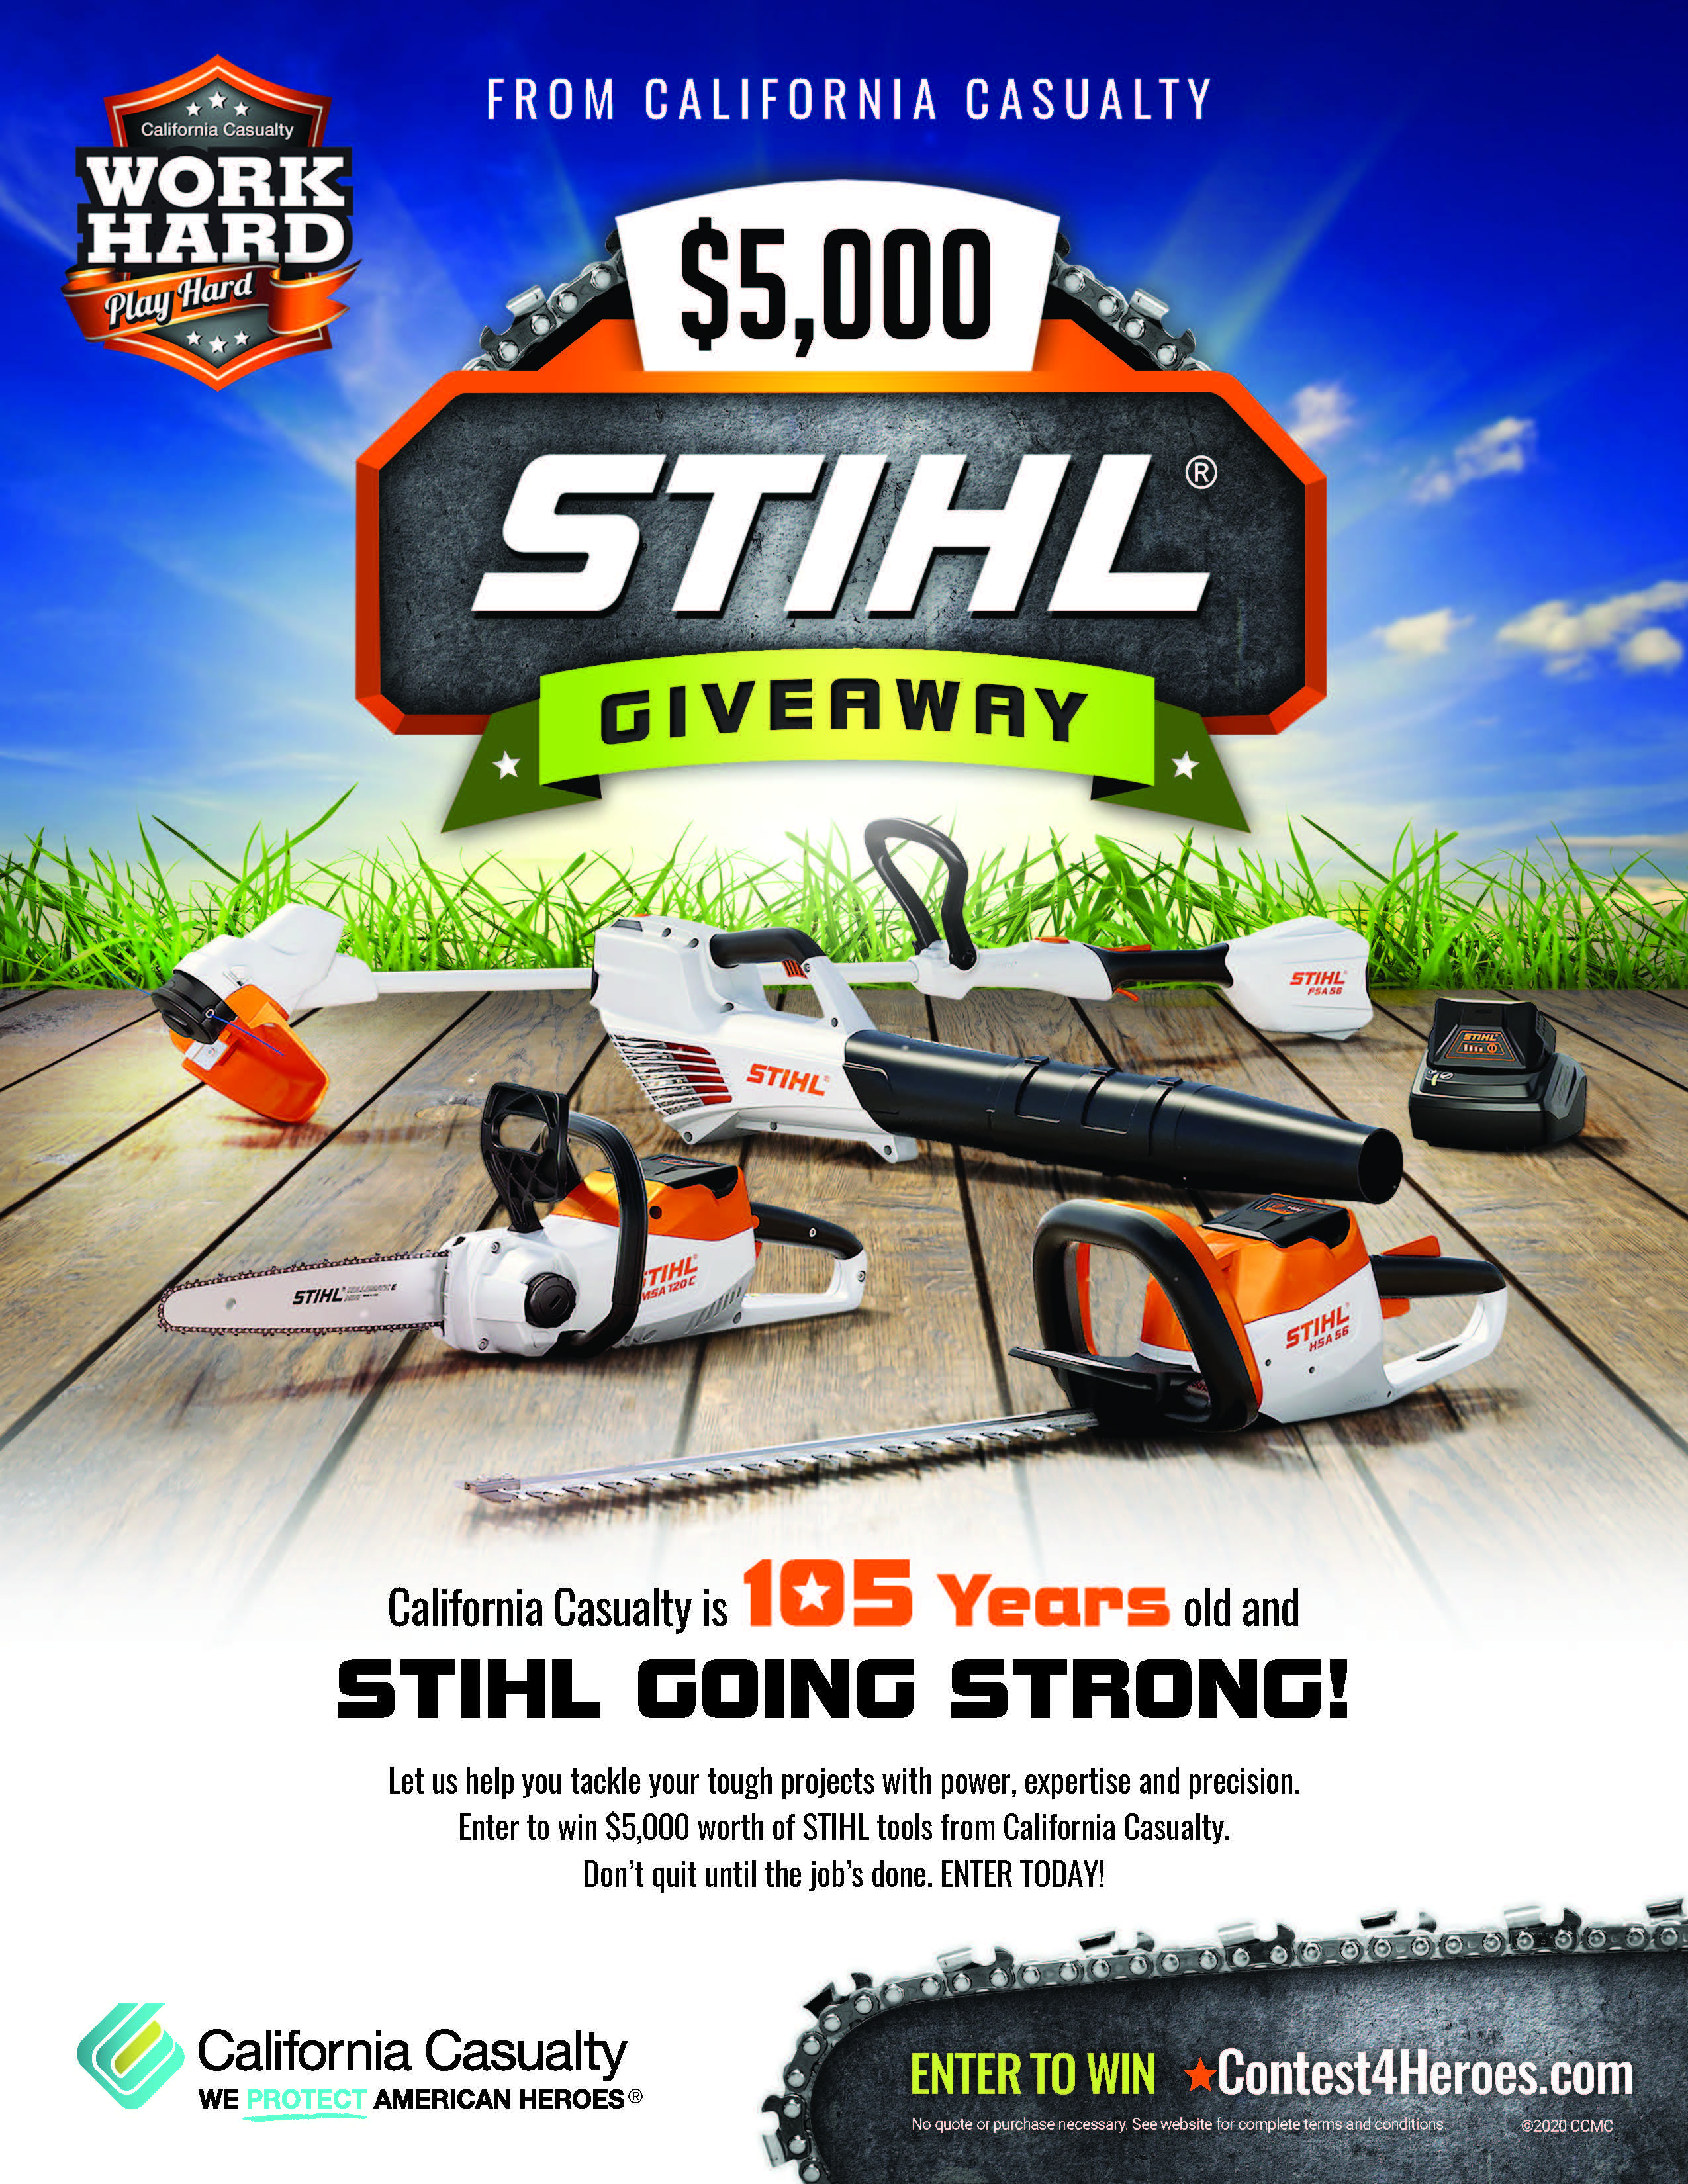 California Casualty's $5,000 STIHL Tools Sweepstakes